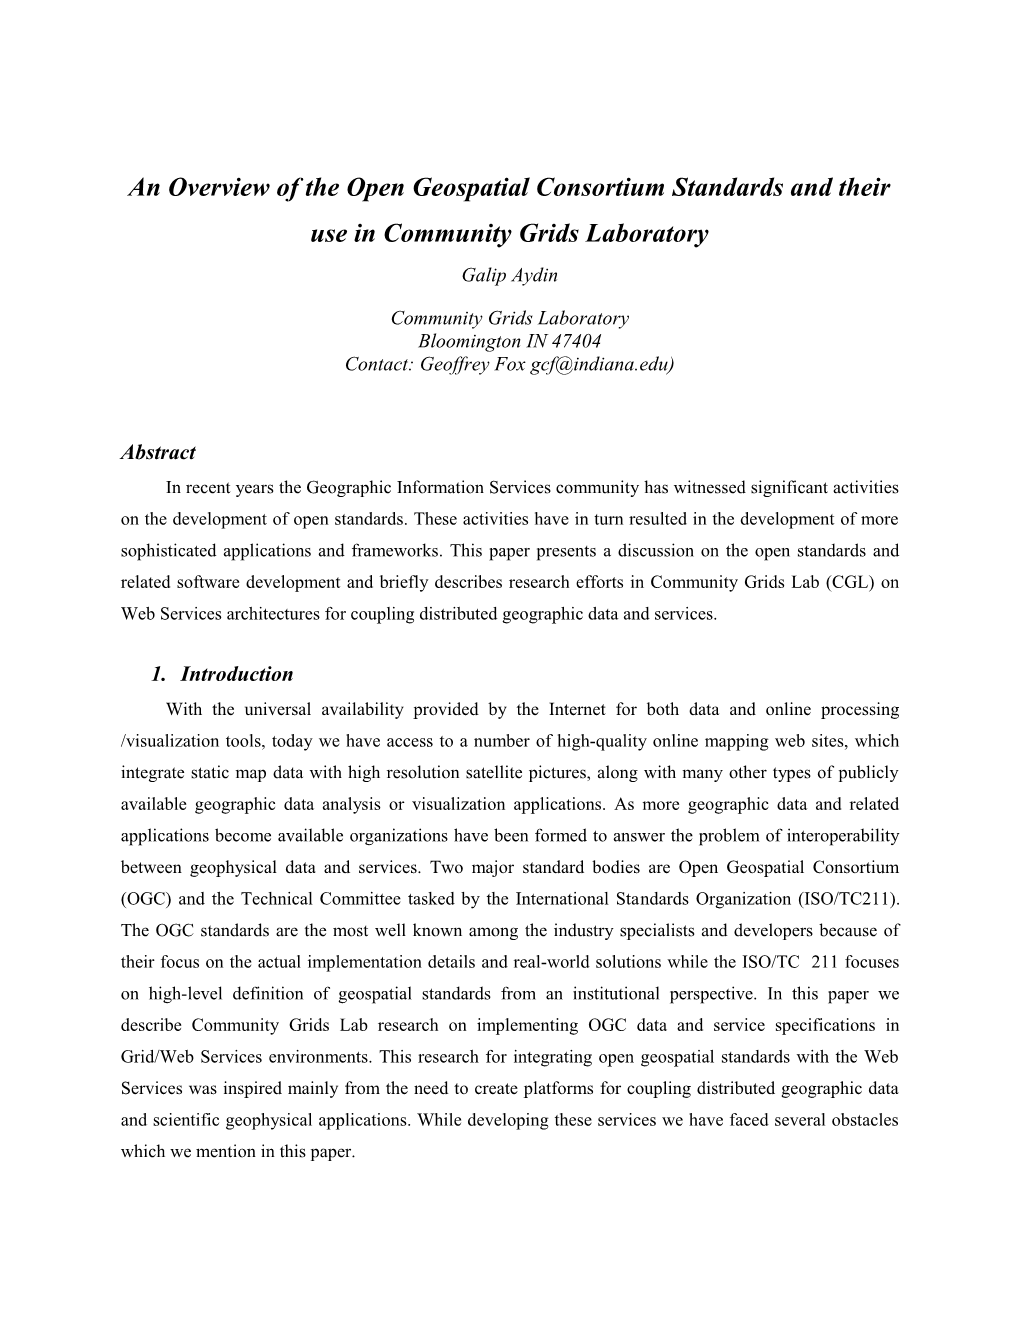 An Overview Ofthe Open Geospatial Consortium Standards and Their Use in Community Grids